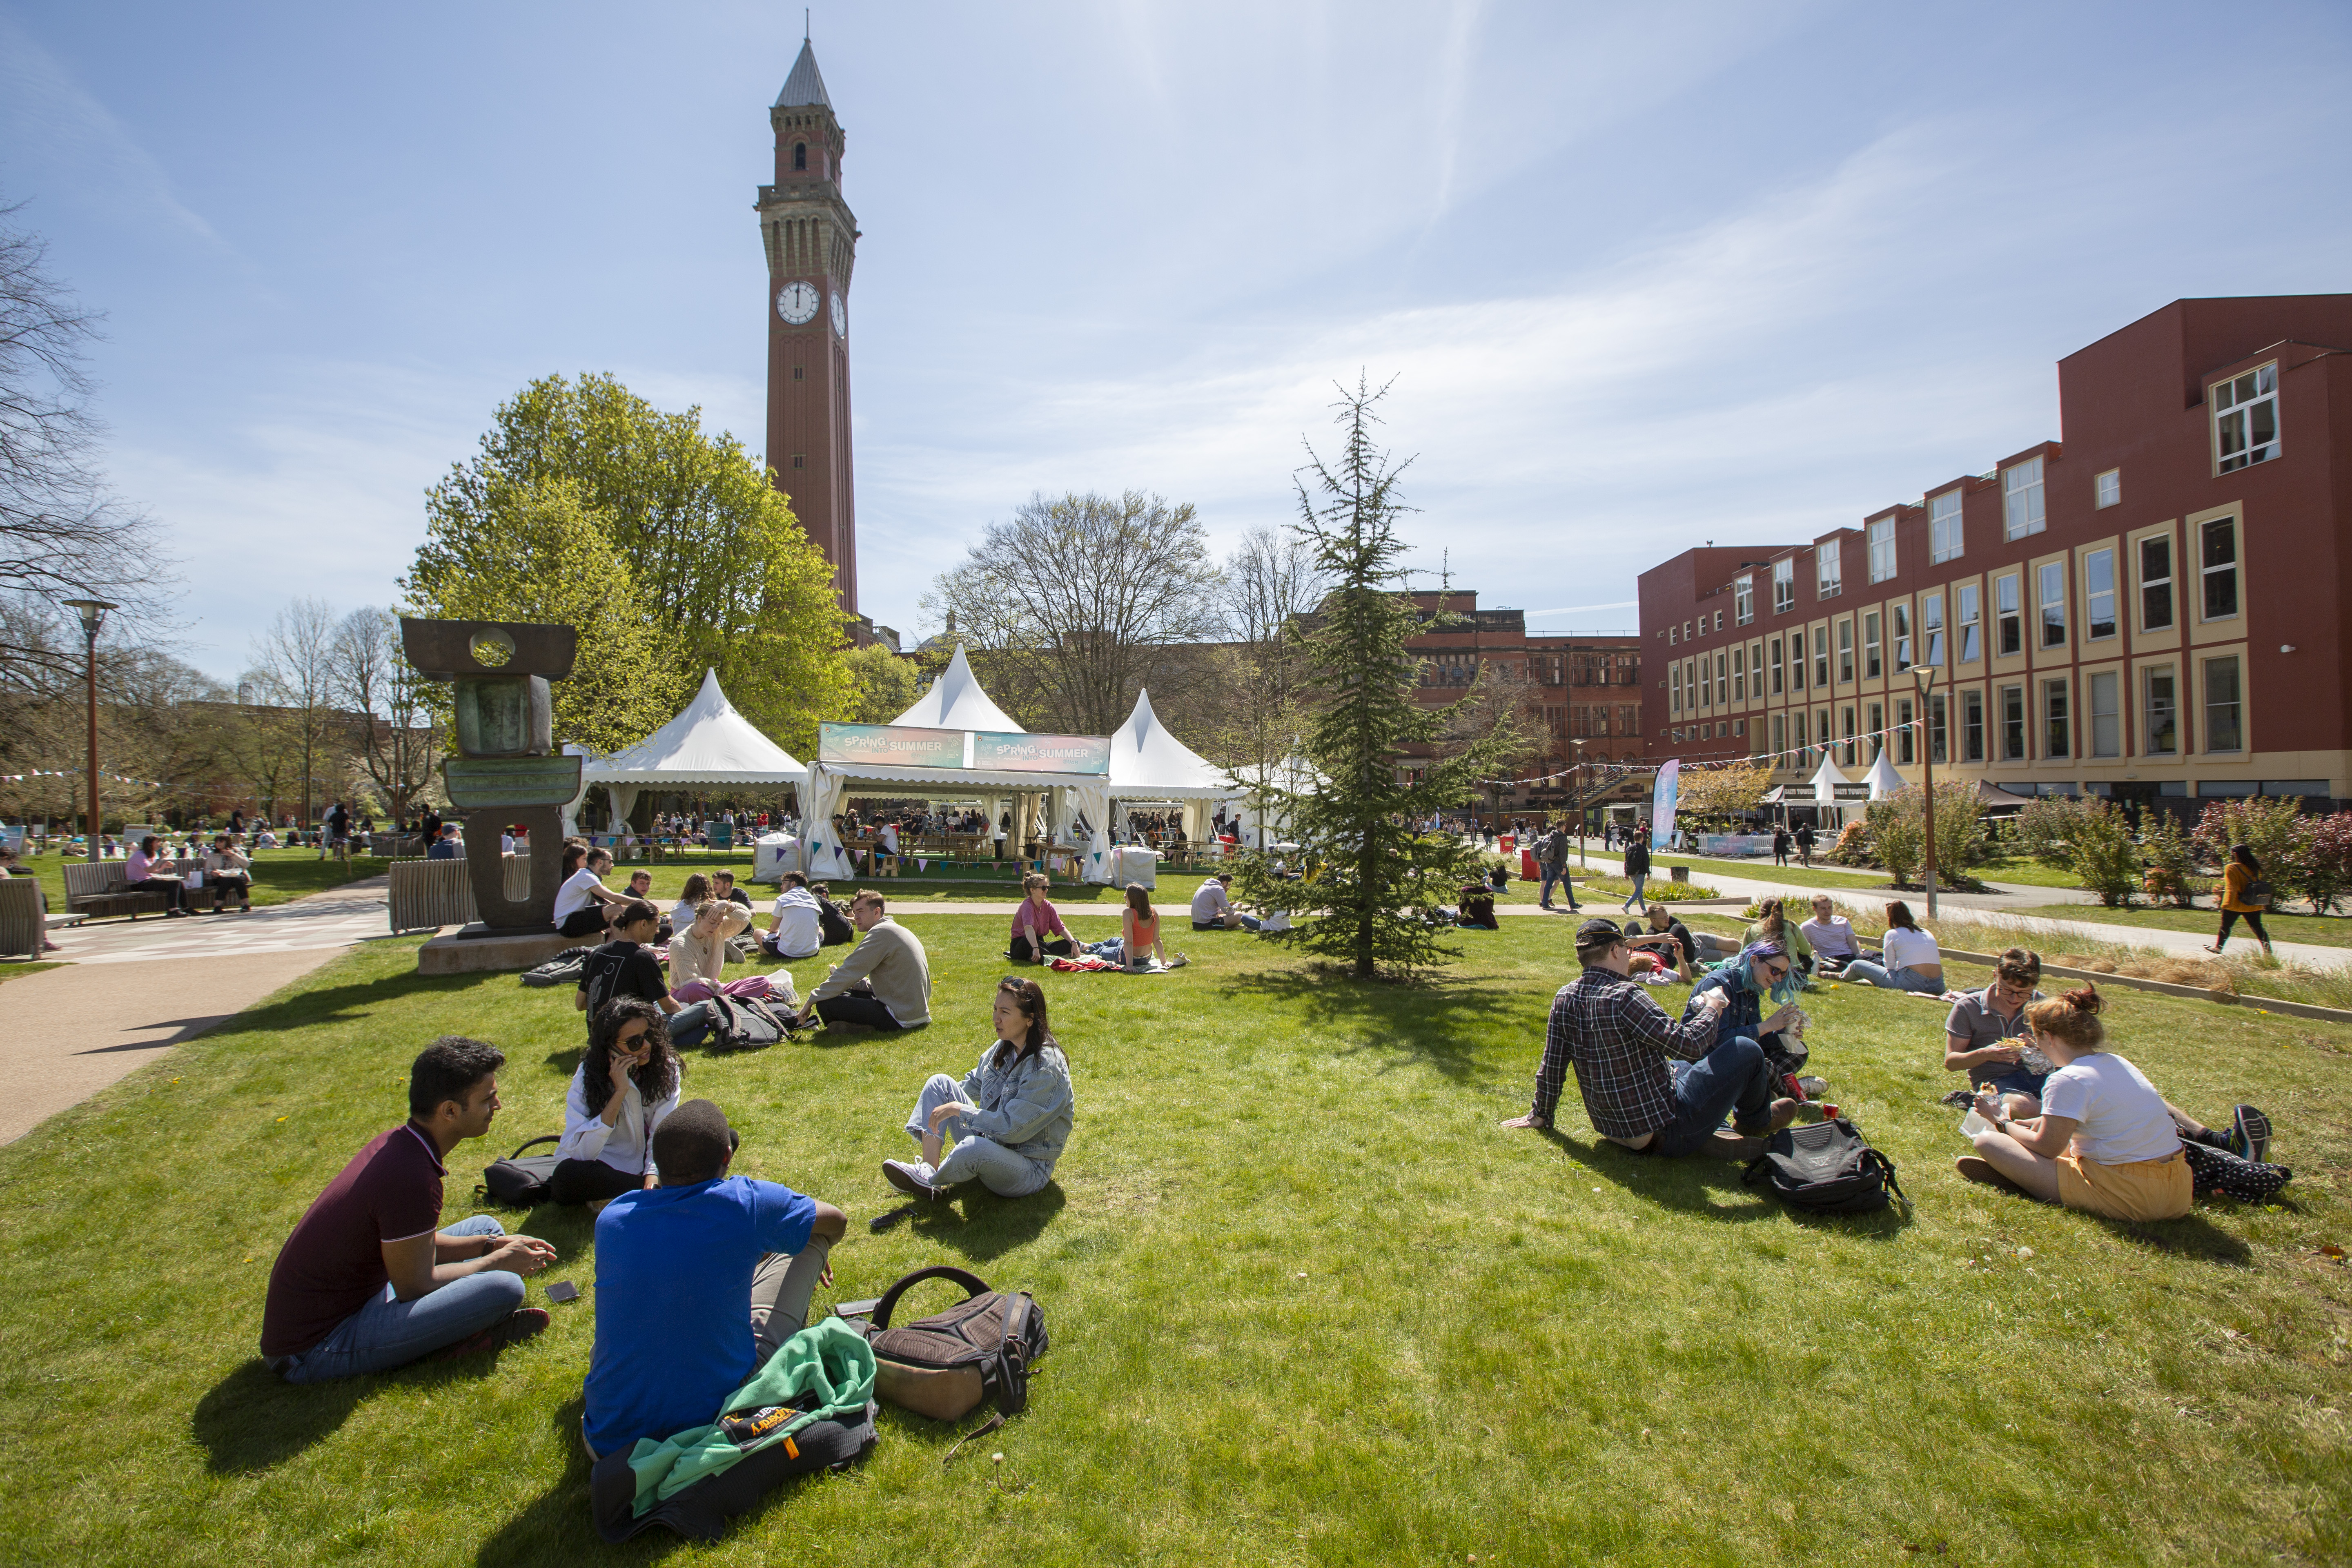 Students sitting on the grass in front of Old Joe clock tower.